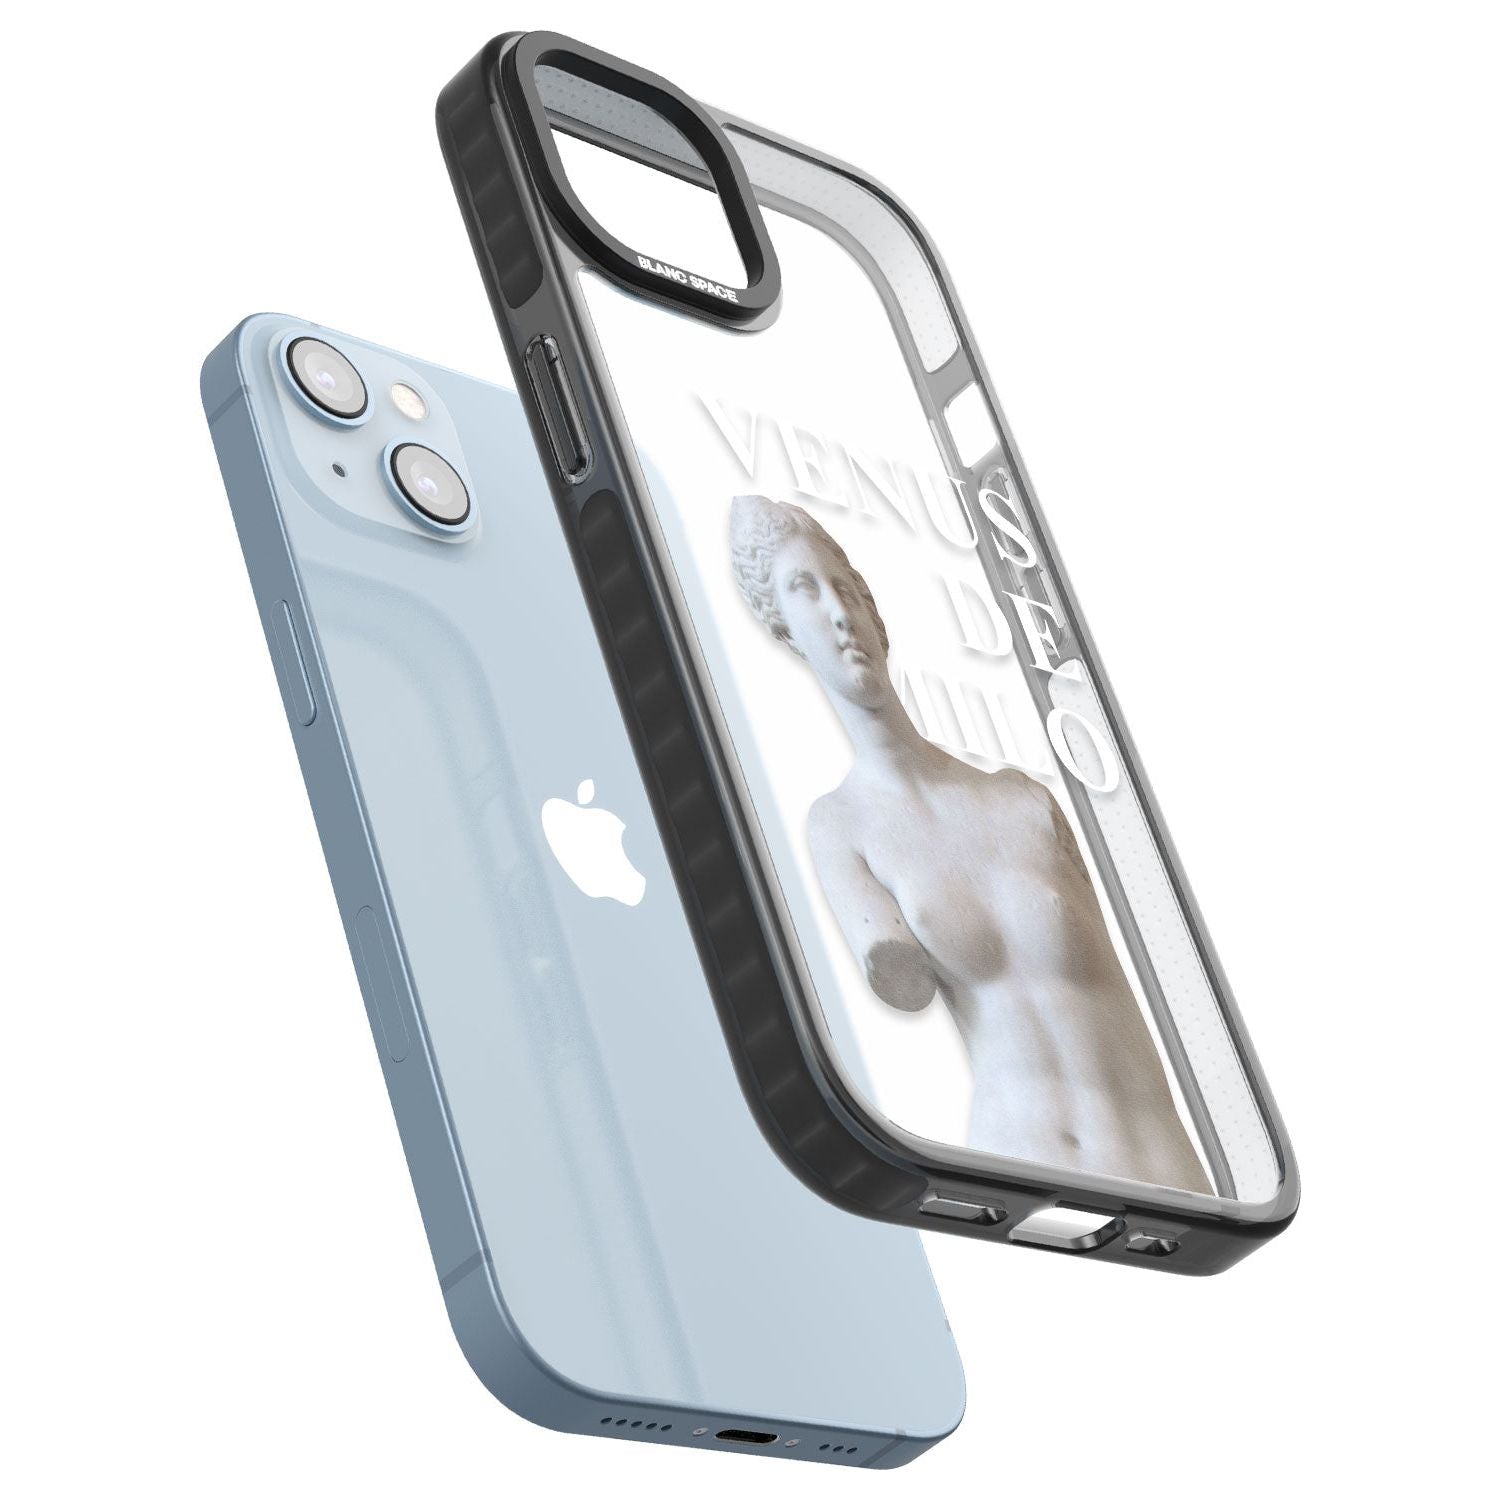 SidewallPhone Case for iPhone 14